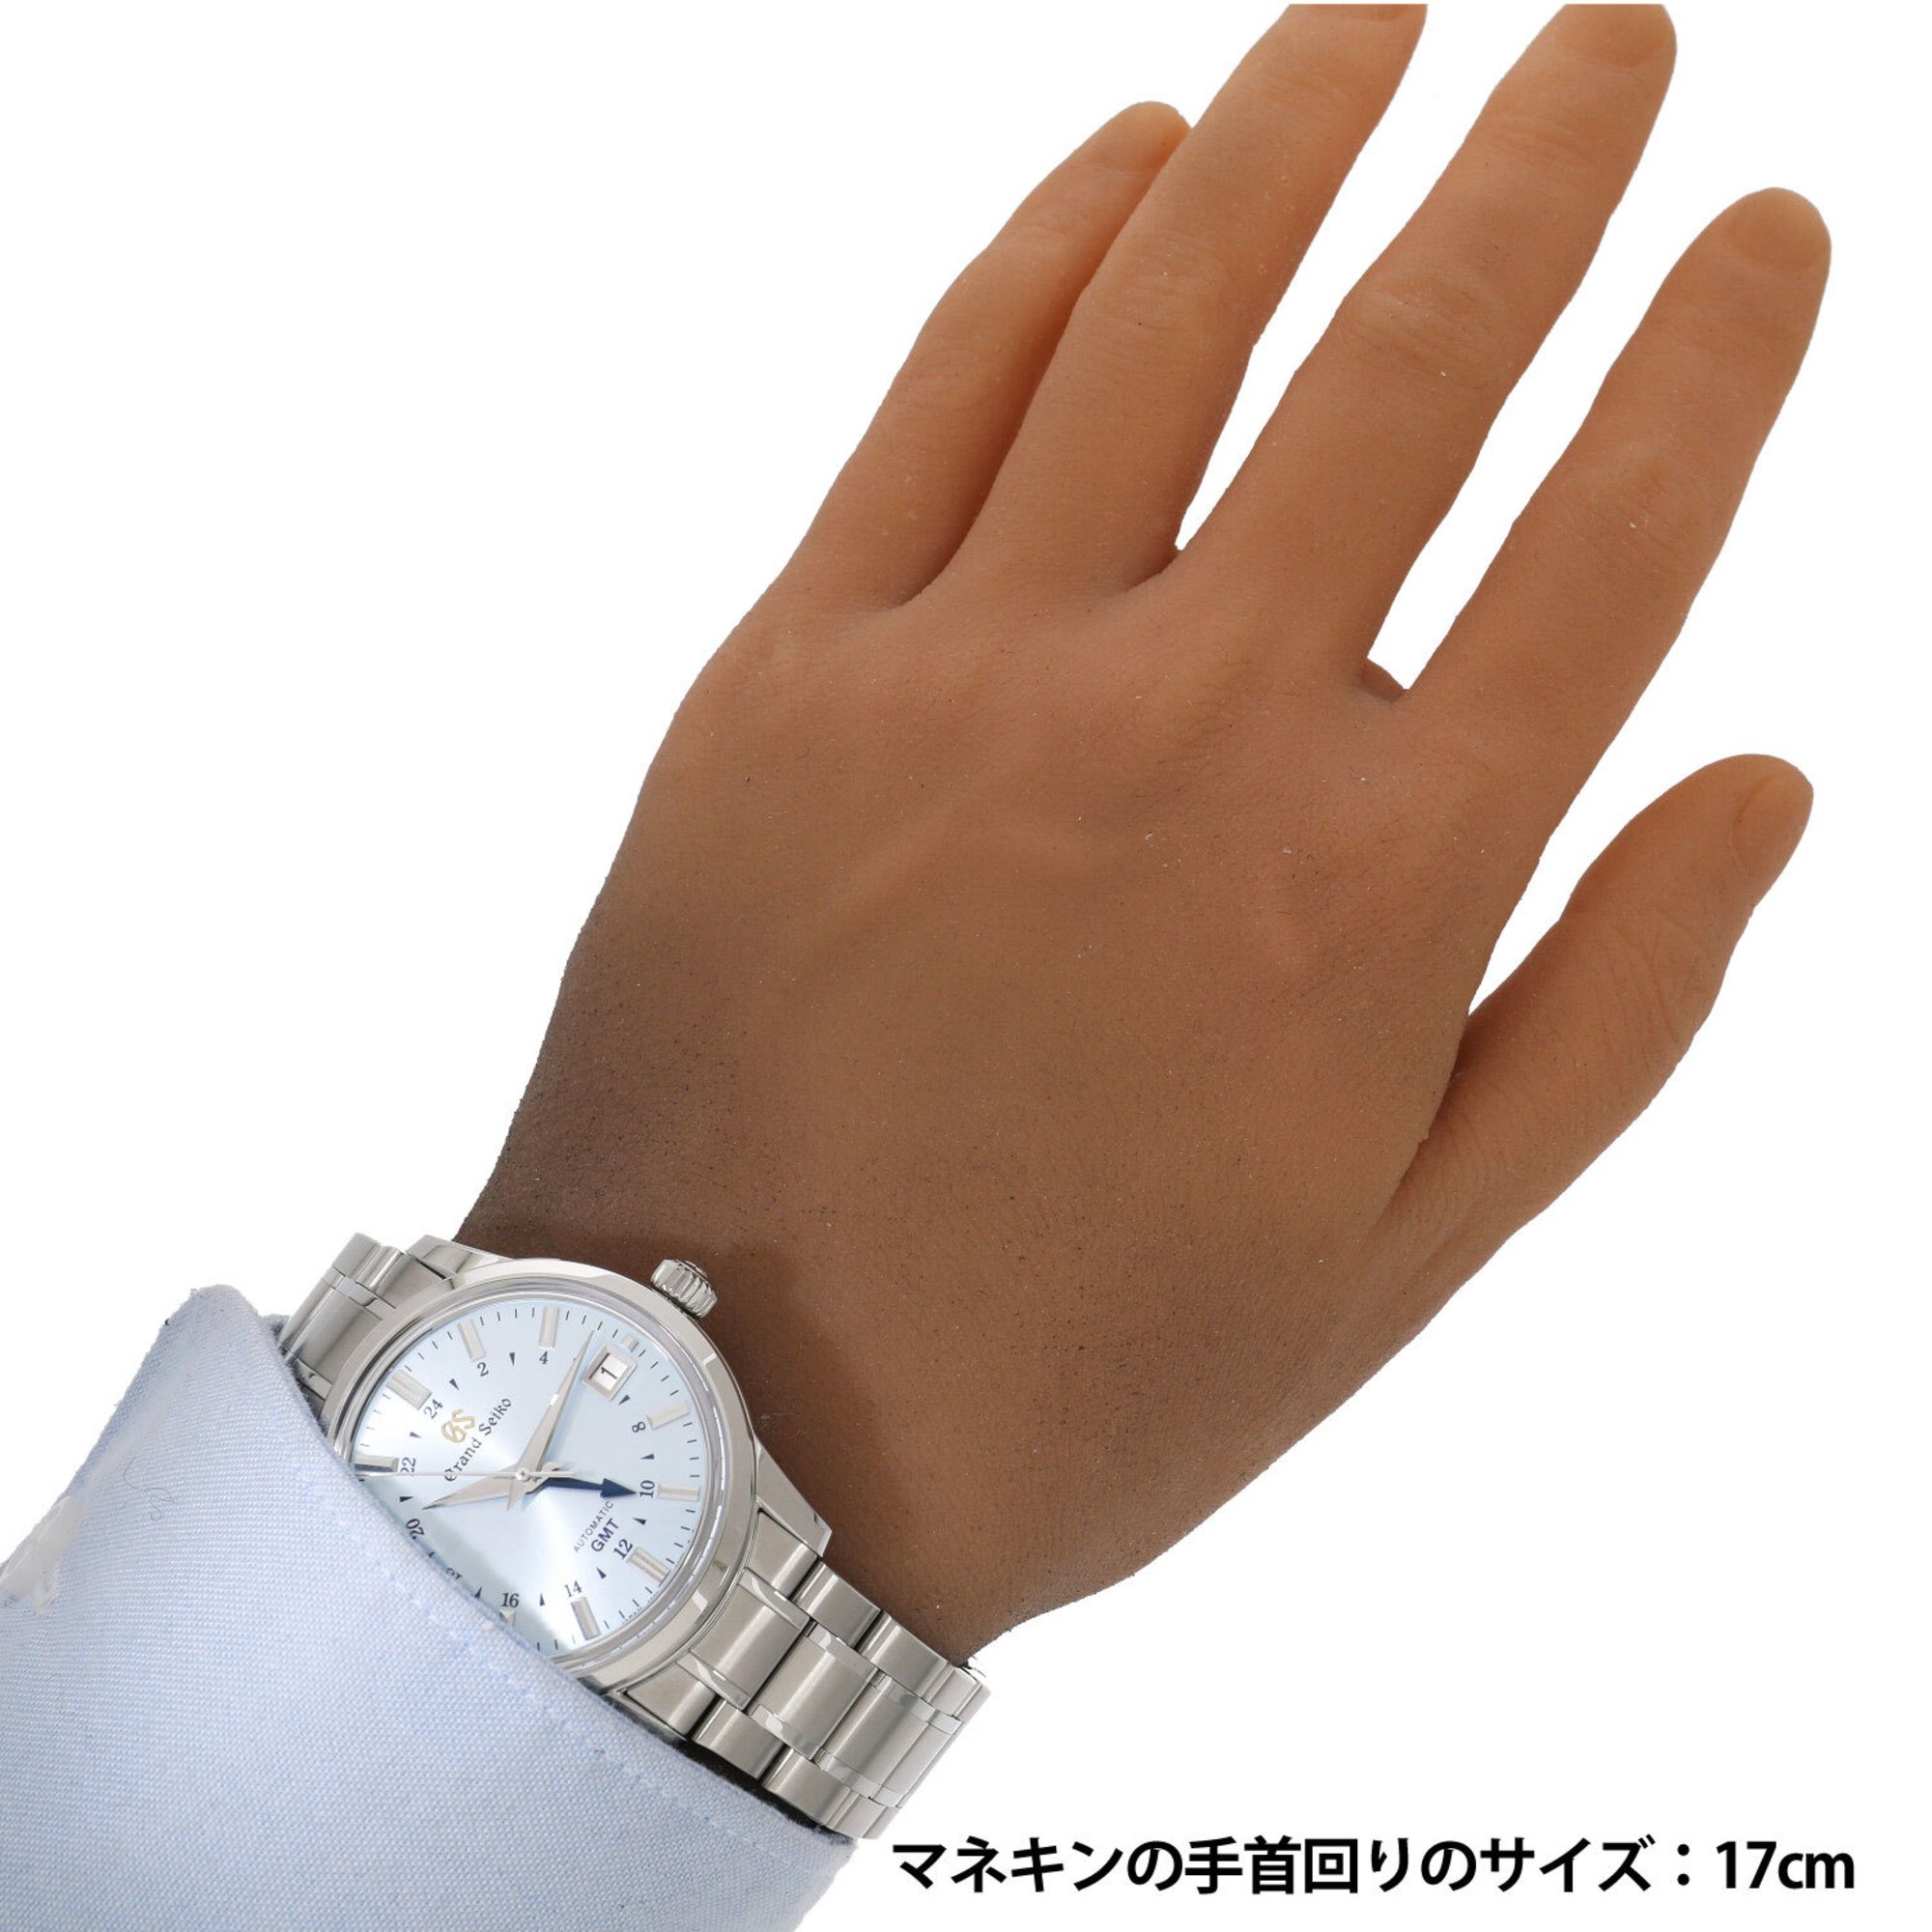 Seiko Grand Elegance Collection Caliber 9S 25th Anniversary 1700 Limited Model SBGM253/9S66-00M0 Sky Blue Men's Watch